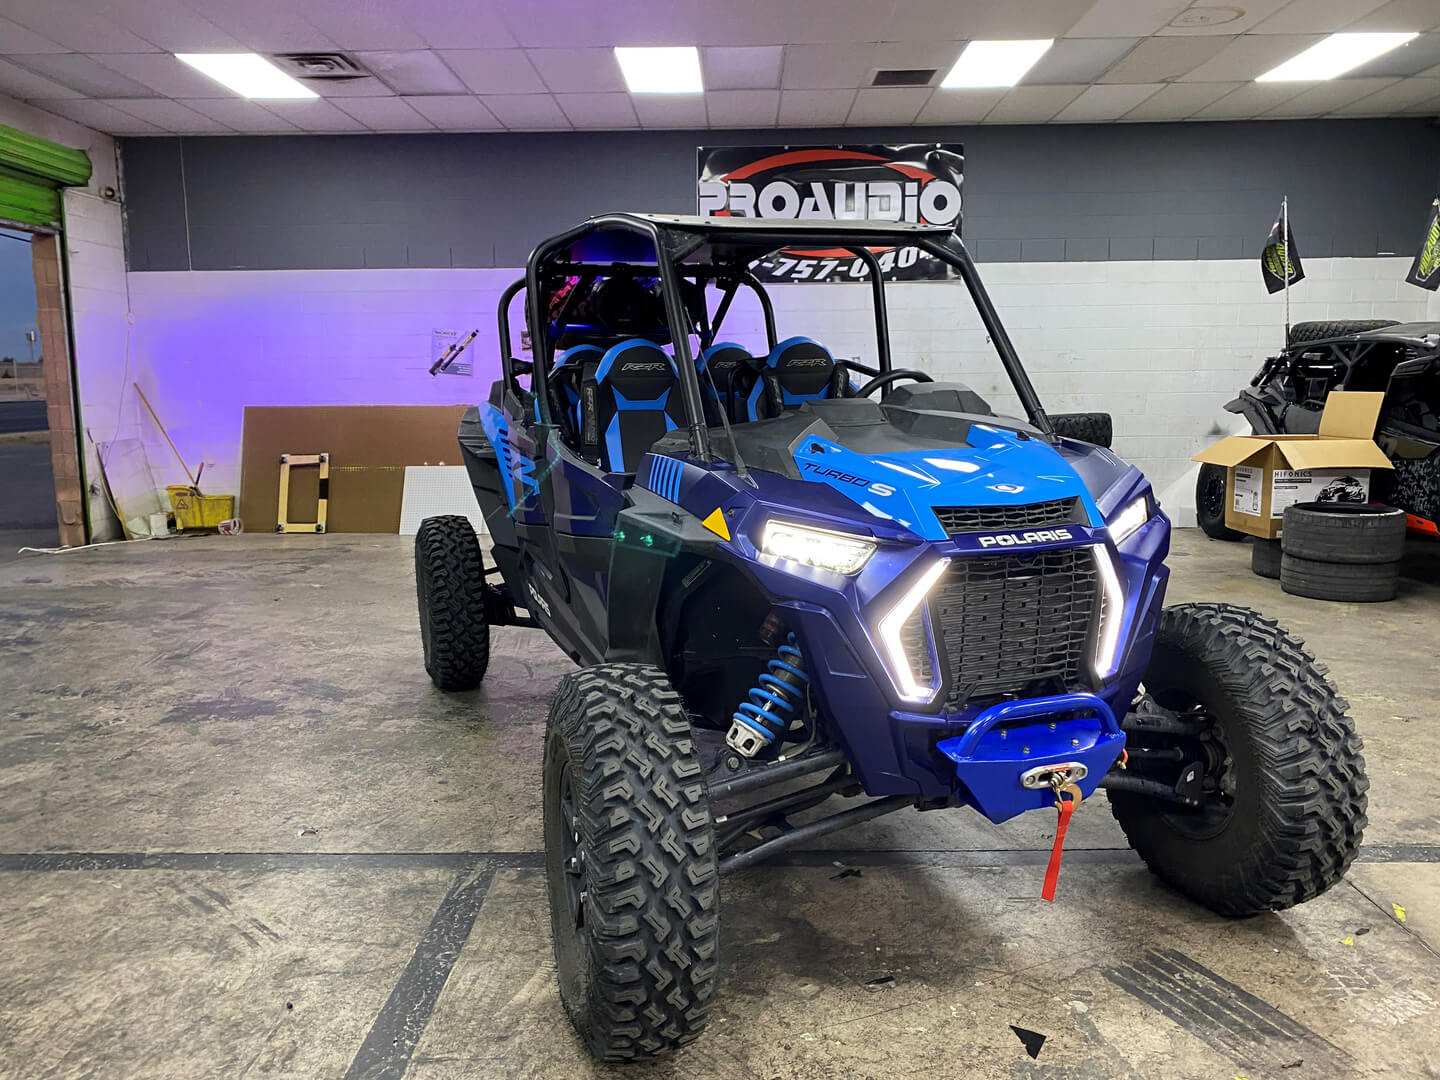 An Upgraded Polaris In Blue Color